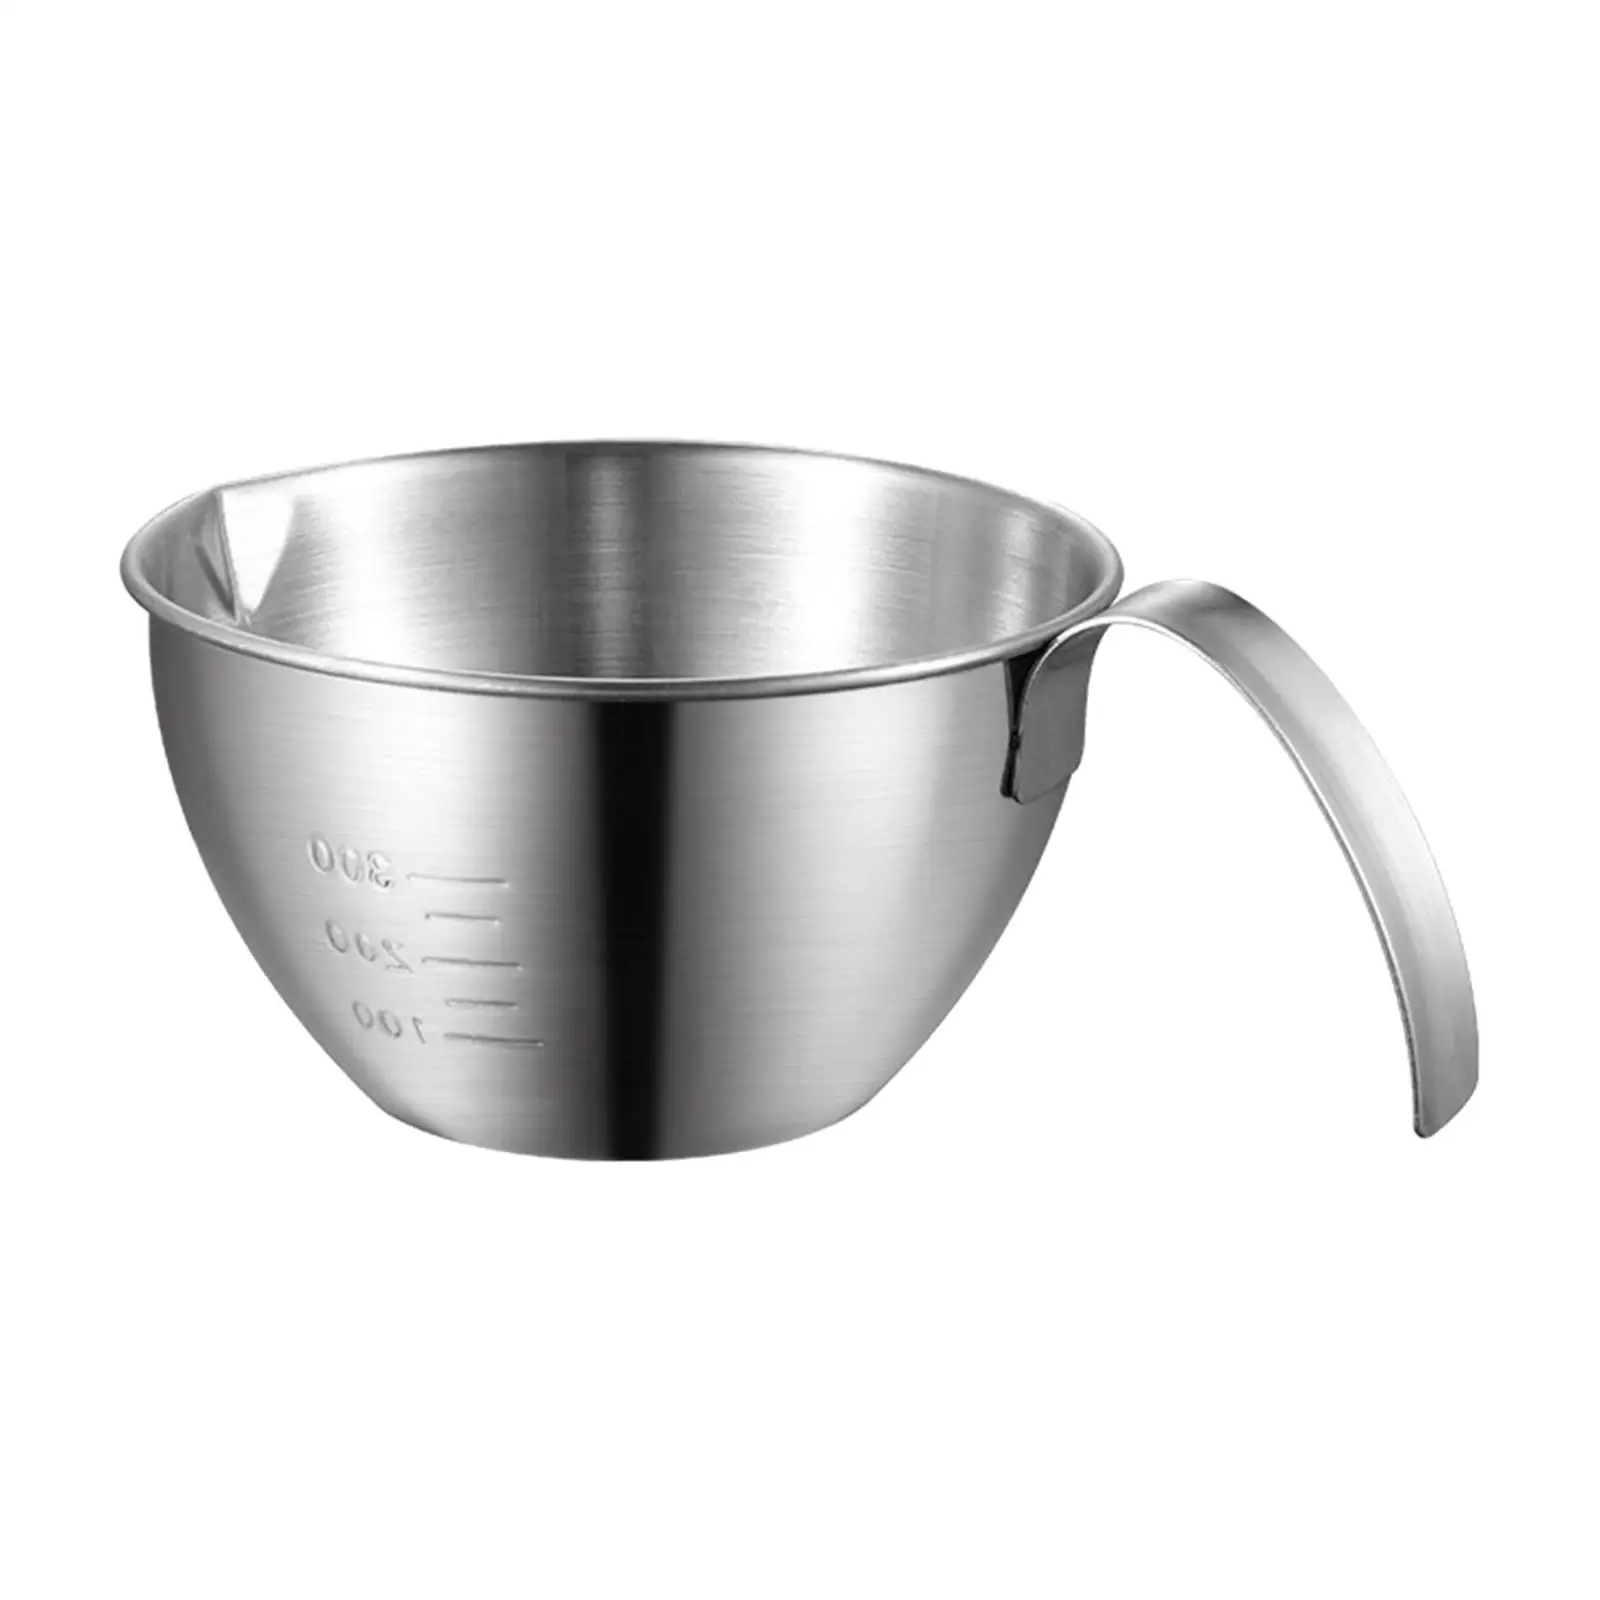 Stainless Steel Mixing Bowl Kitchen Utensils Long Handle Serving Bowl Egg Whisking Bowl for Dessert Cooking Soup Snacks